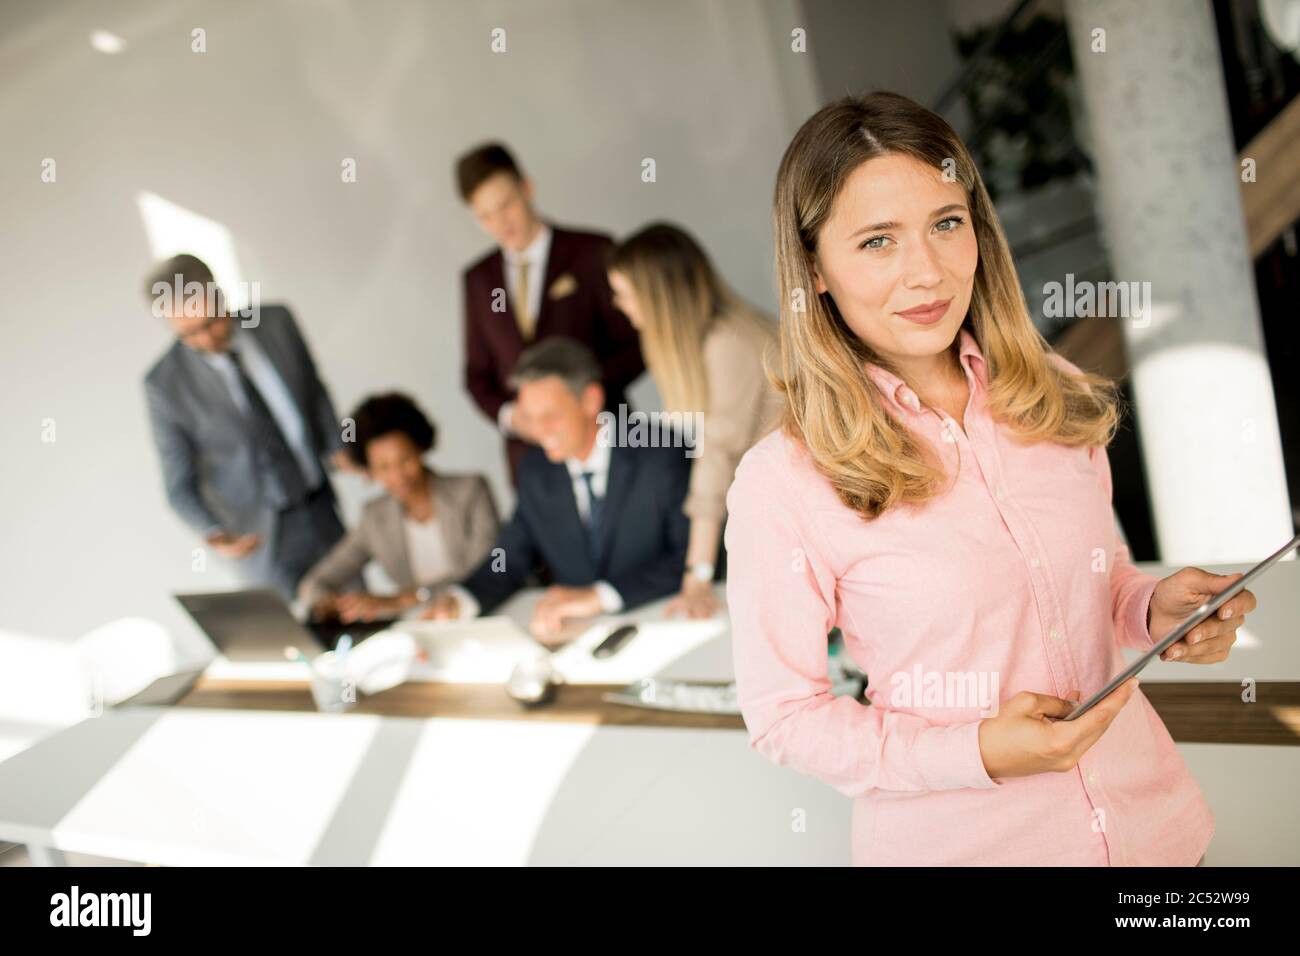 Pretty young business woman using digital tablet in the office Stock Photo